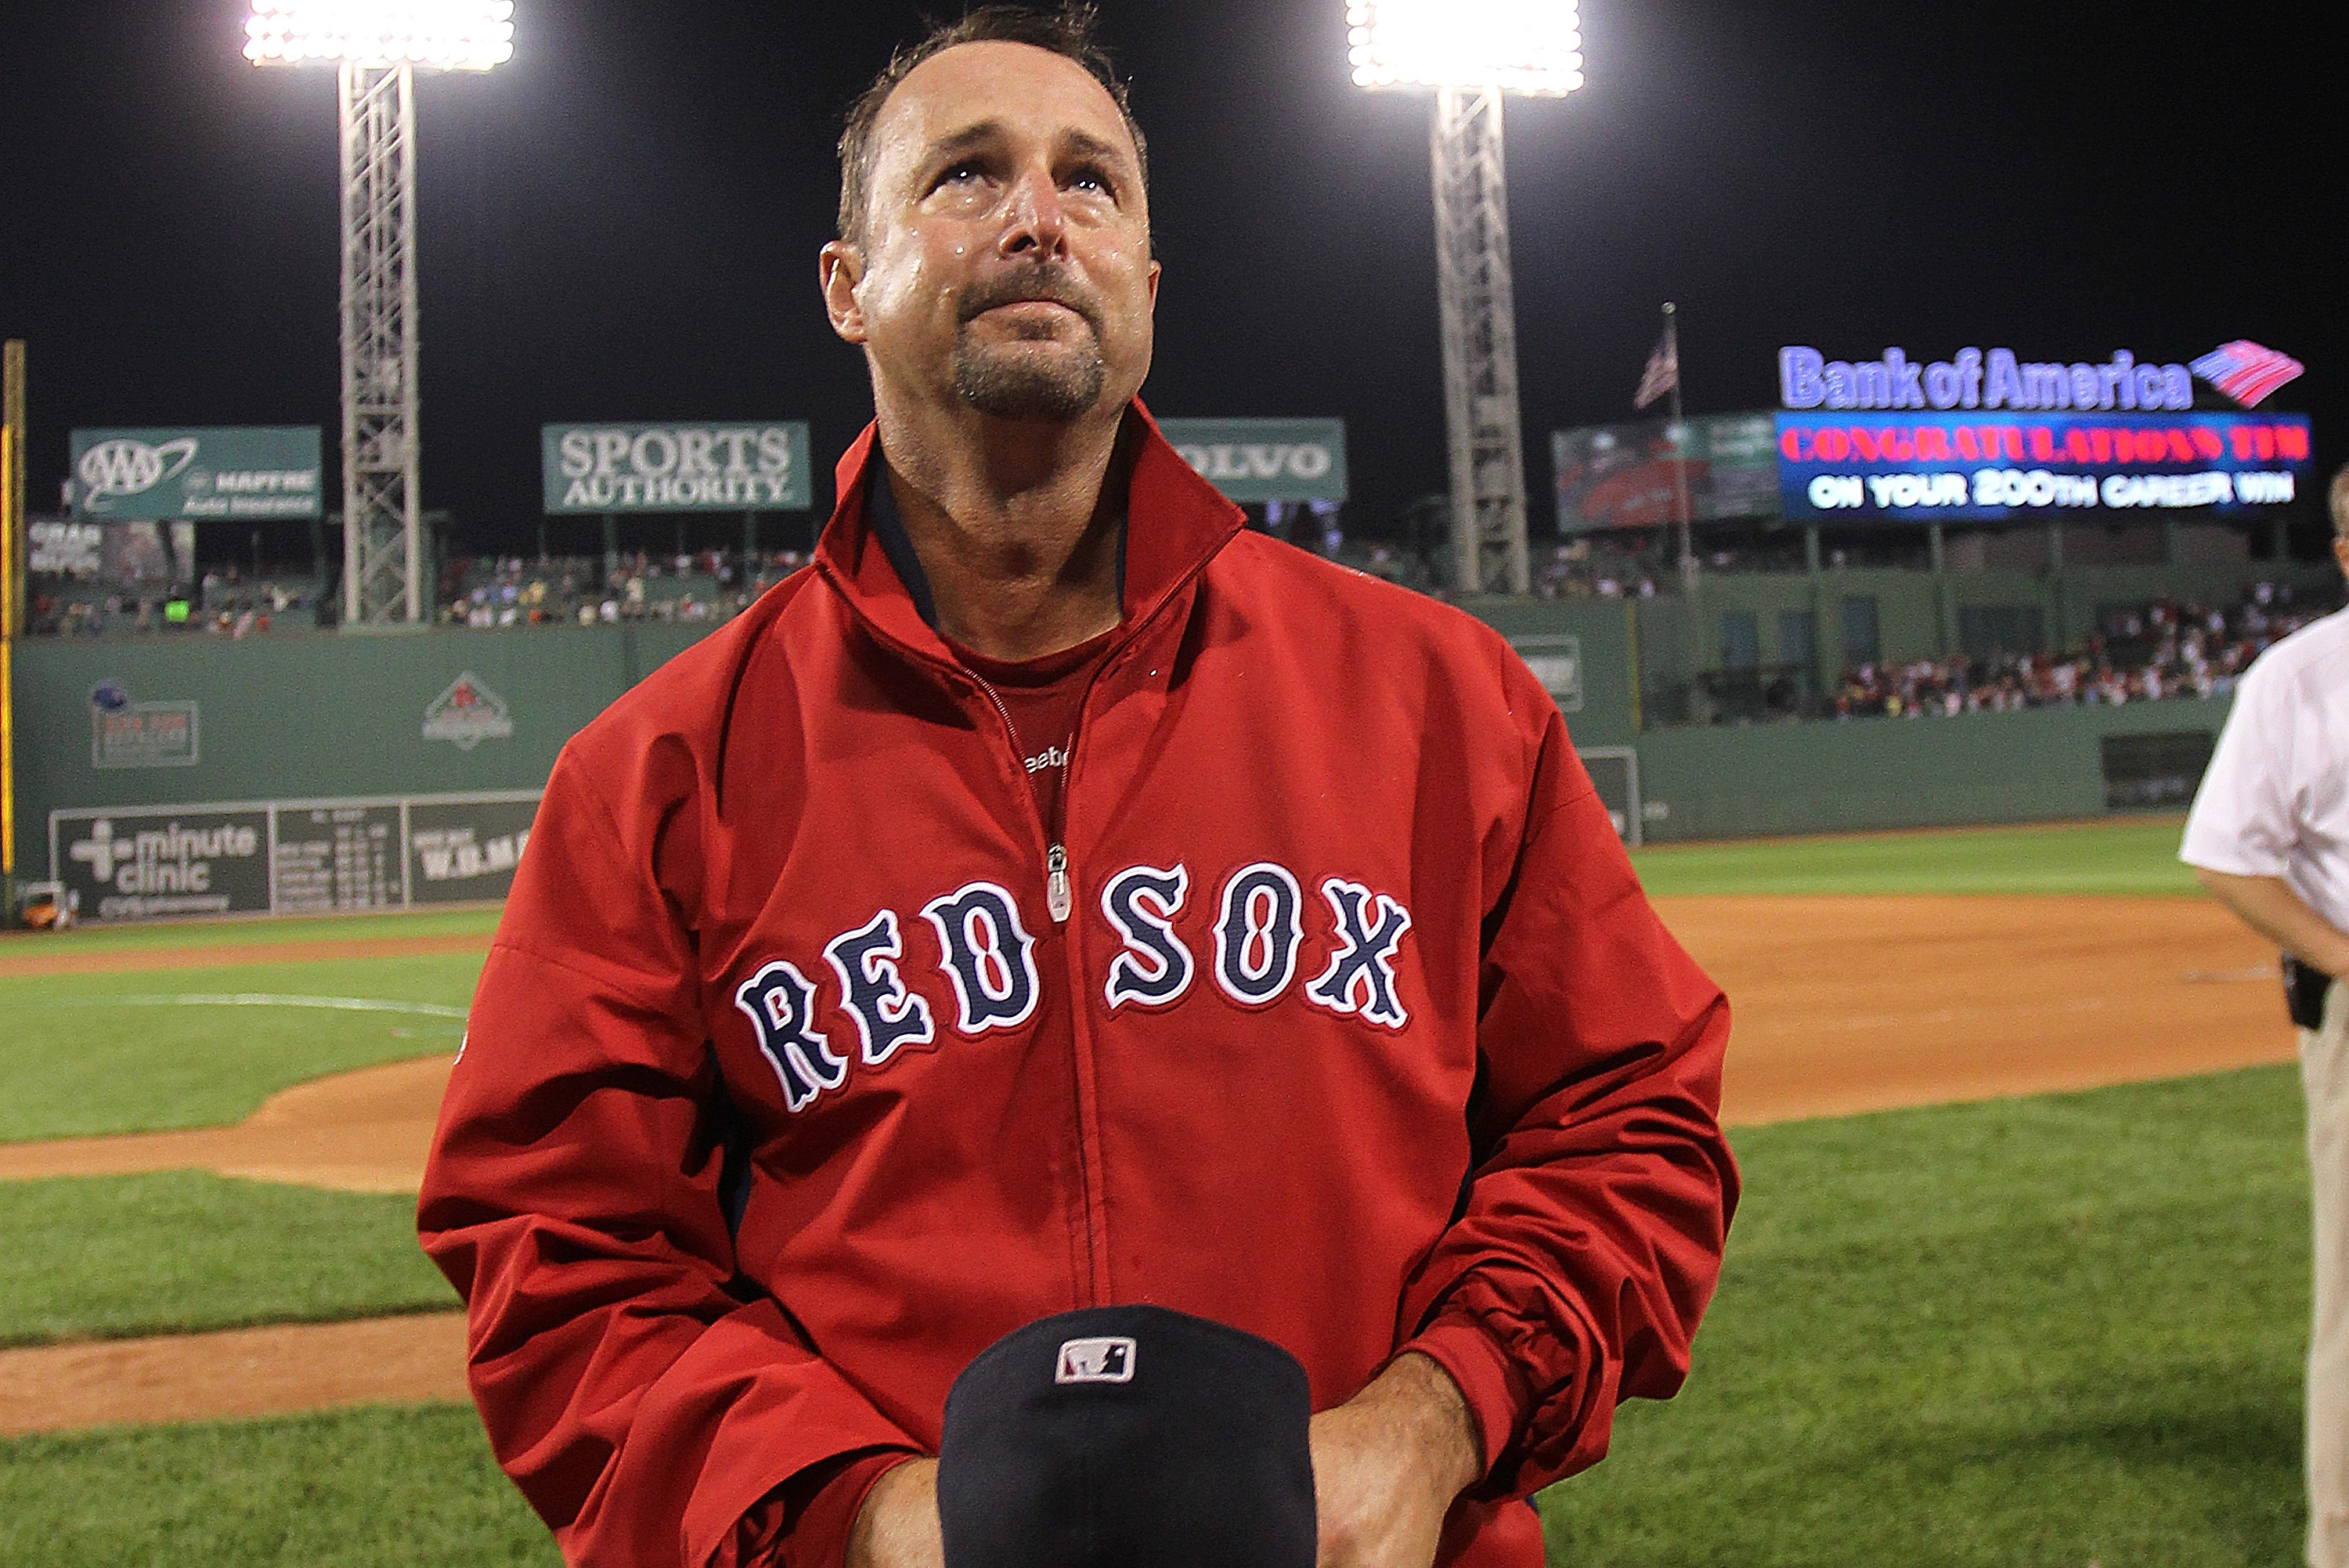 Tim Wakefield appears at Hanover PTO event